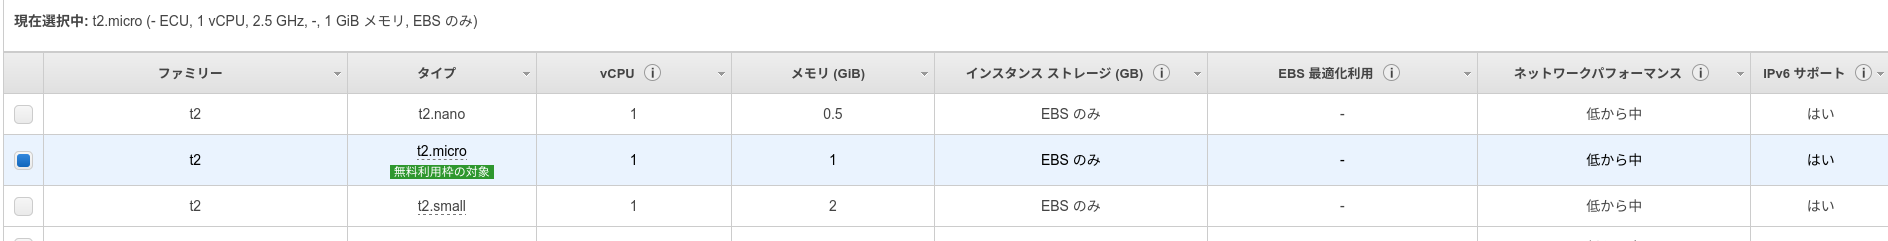 images/aws_ec2_step2.png